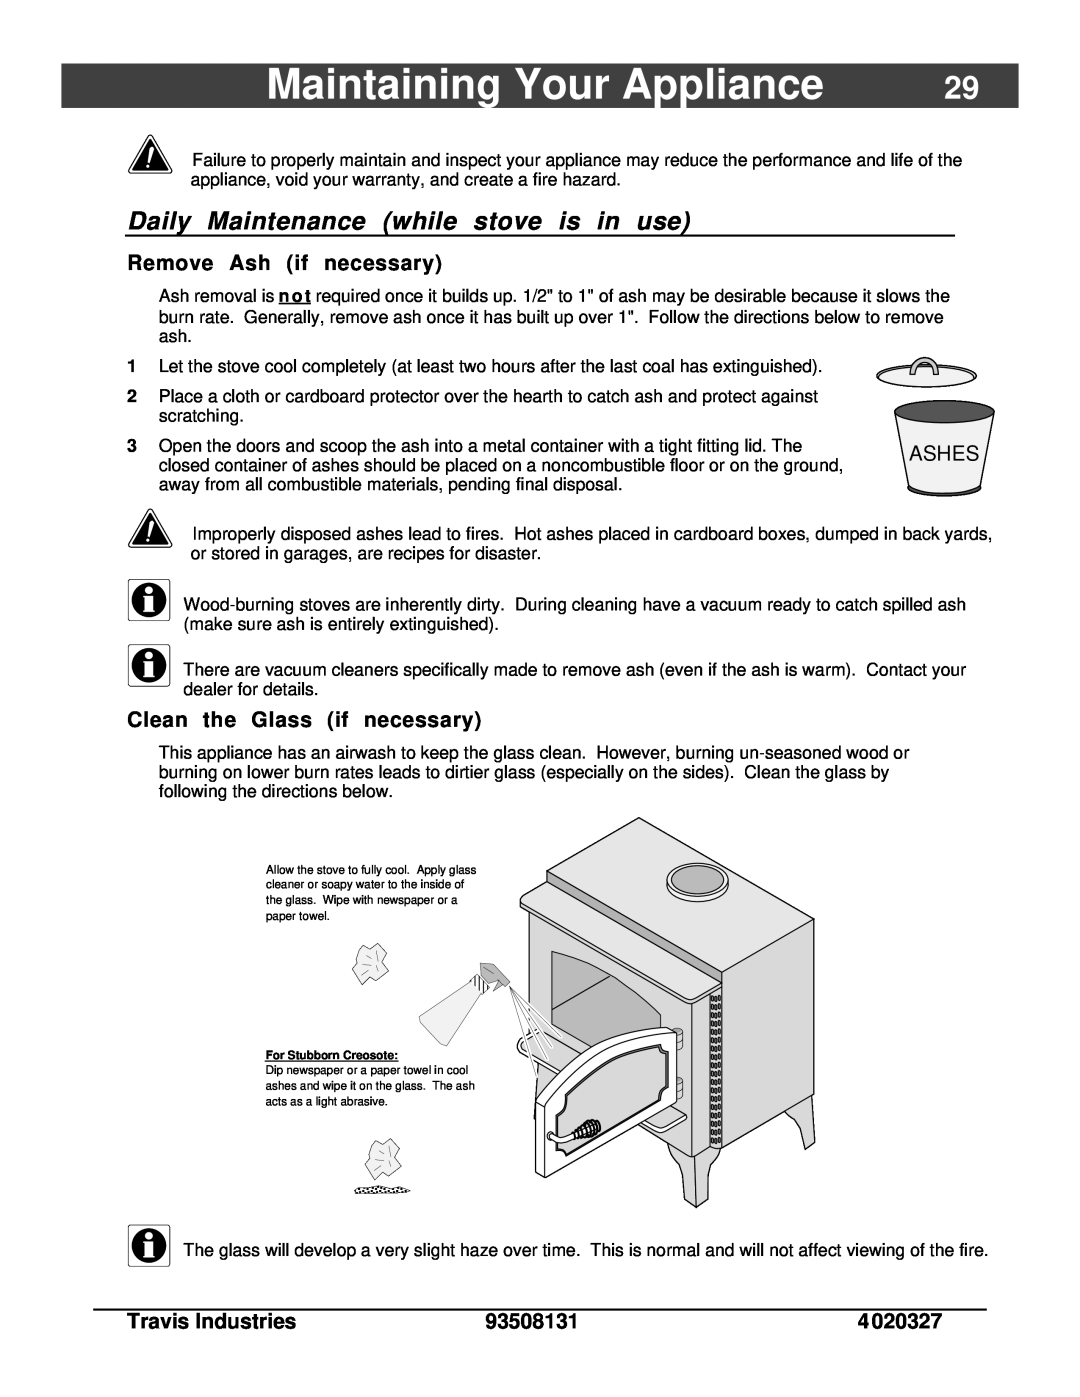 Lopi Answer Wood Stove owner manual Maintaining Your Appliance, Daily Maintenance while stove is in use, Ashes 